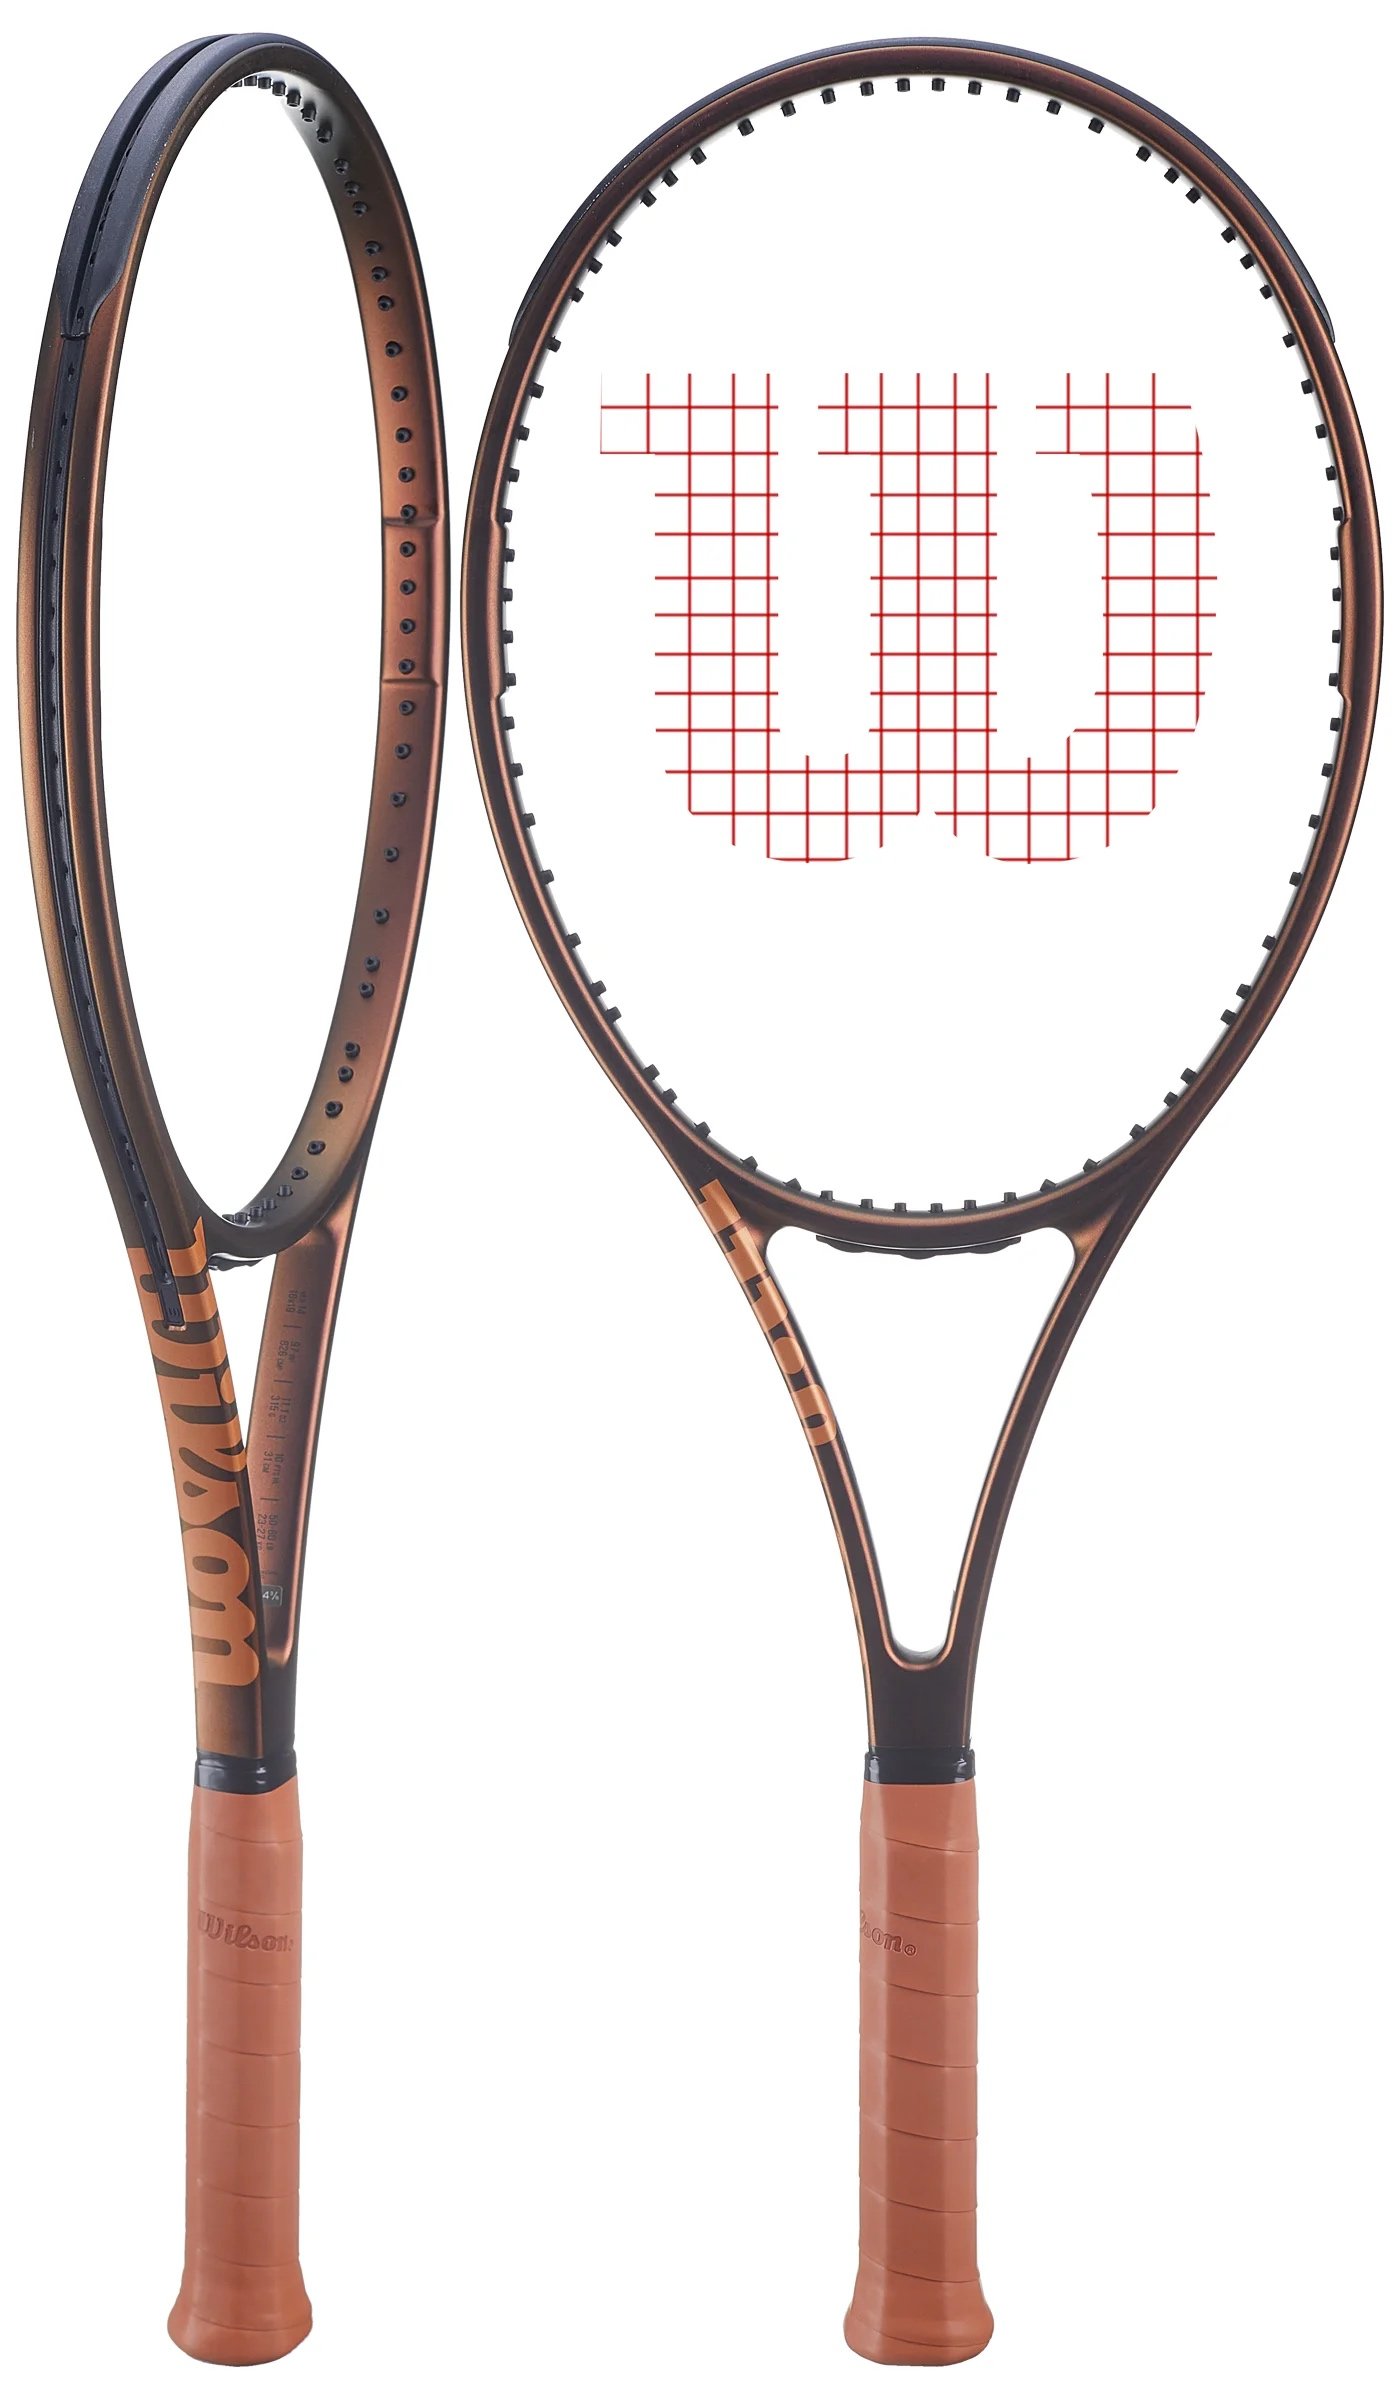 Wilson Pro Staff v14 (97 and X) Tennis Racket Review — Tennis